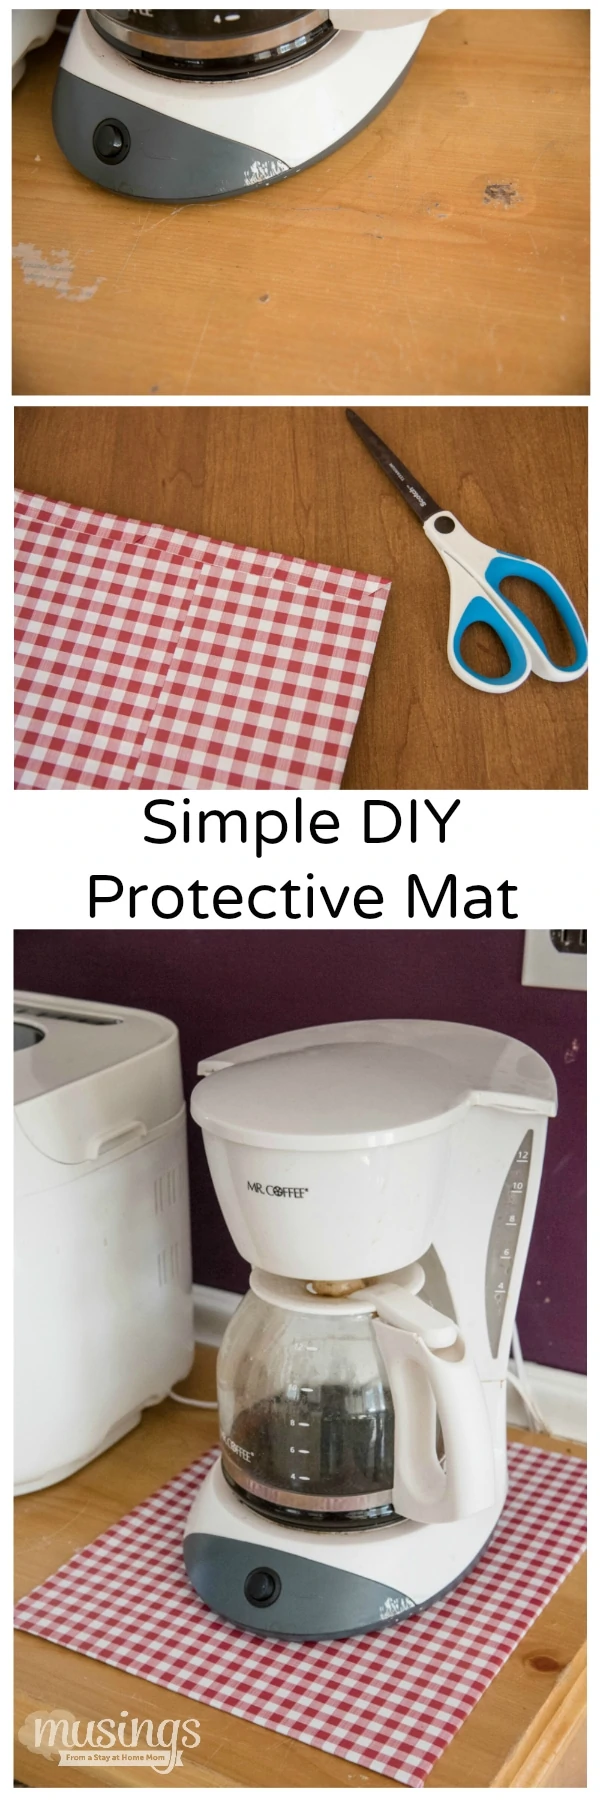 Protect surfaces with this simple DIY protective mat - it's easy to make yourself - in any size or shape you need, plus it's decorated too!